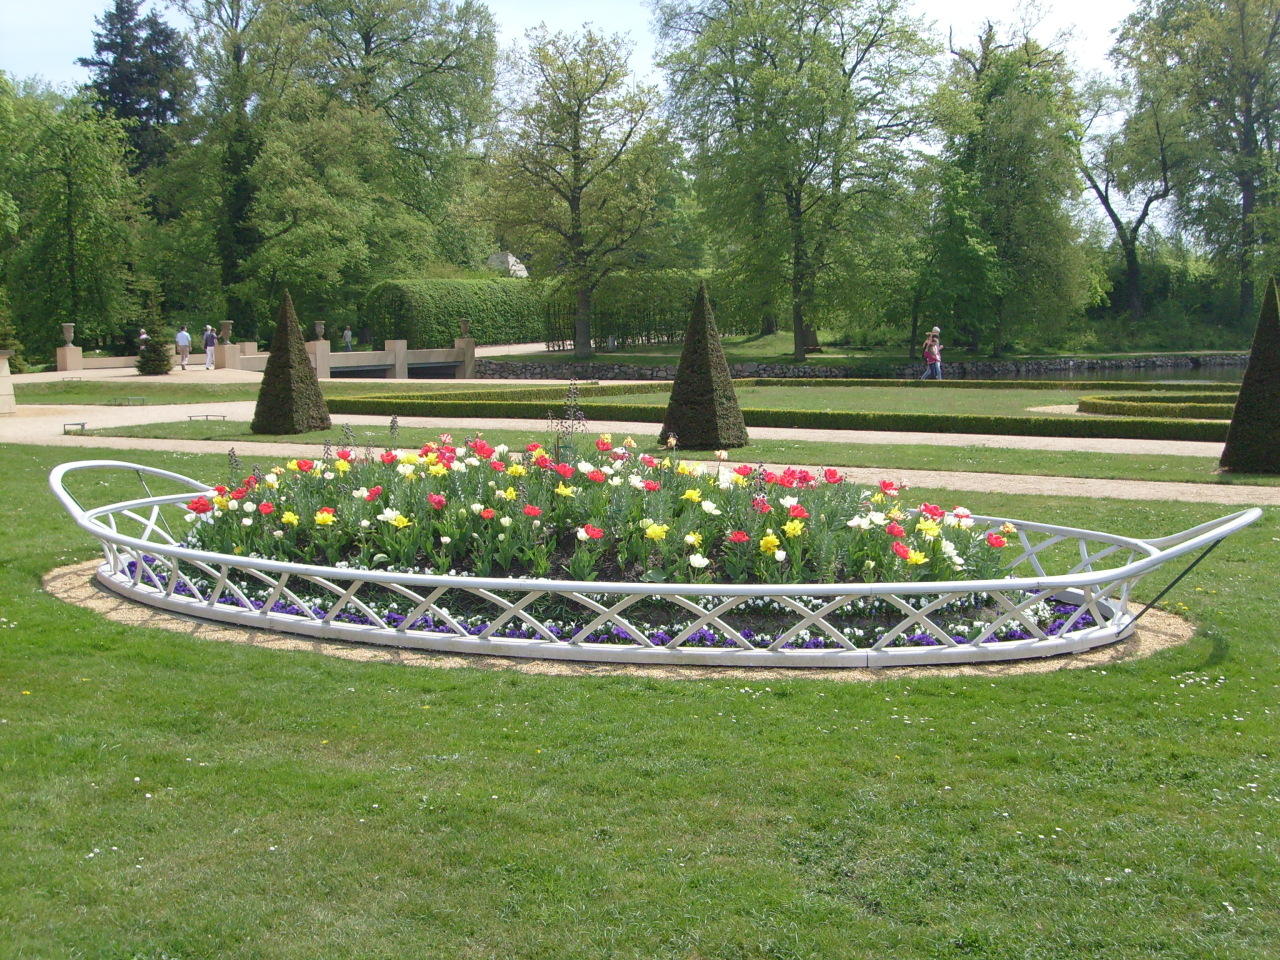 a bench is surrounded by a circle planter with many flowers